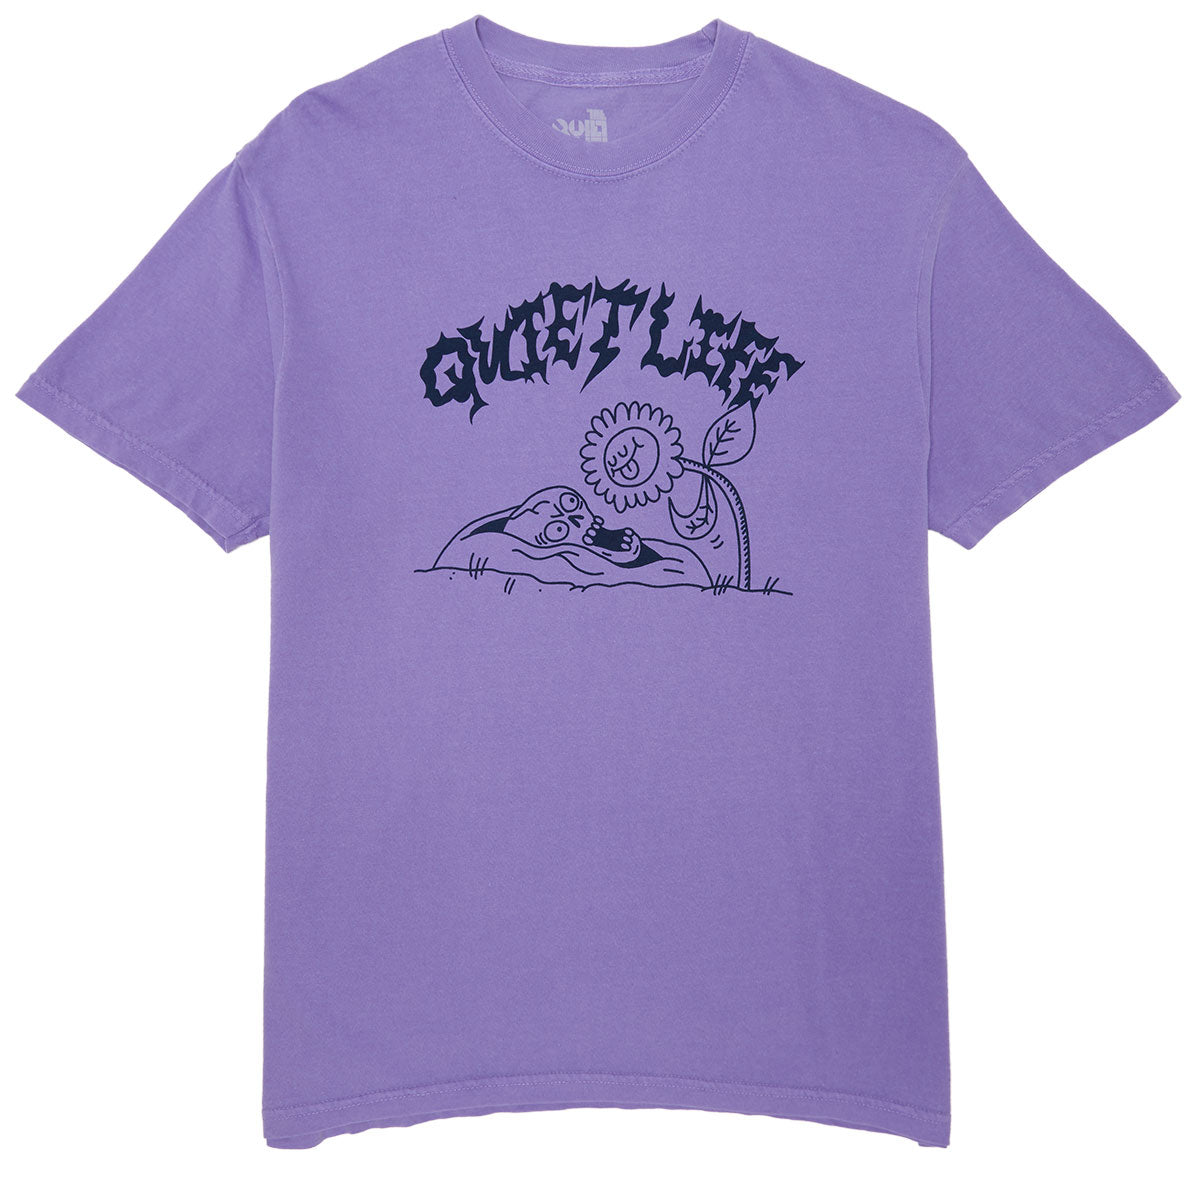 The Quiet Life x Jay Howell Flower Fright Pigment Dyed T-Shirt - Lavender image 1